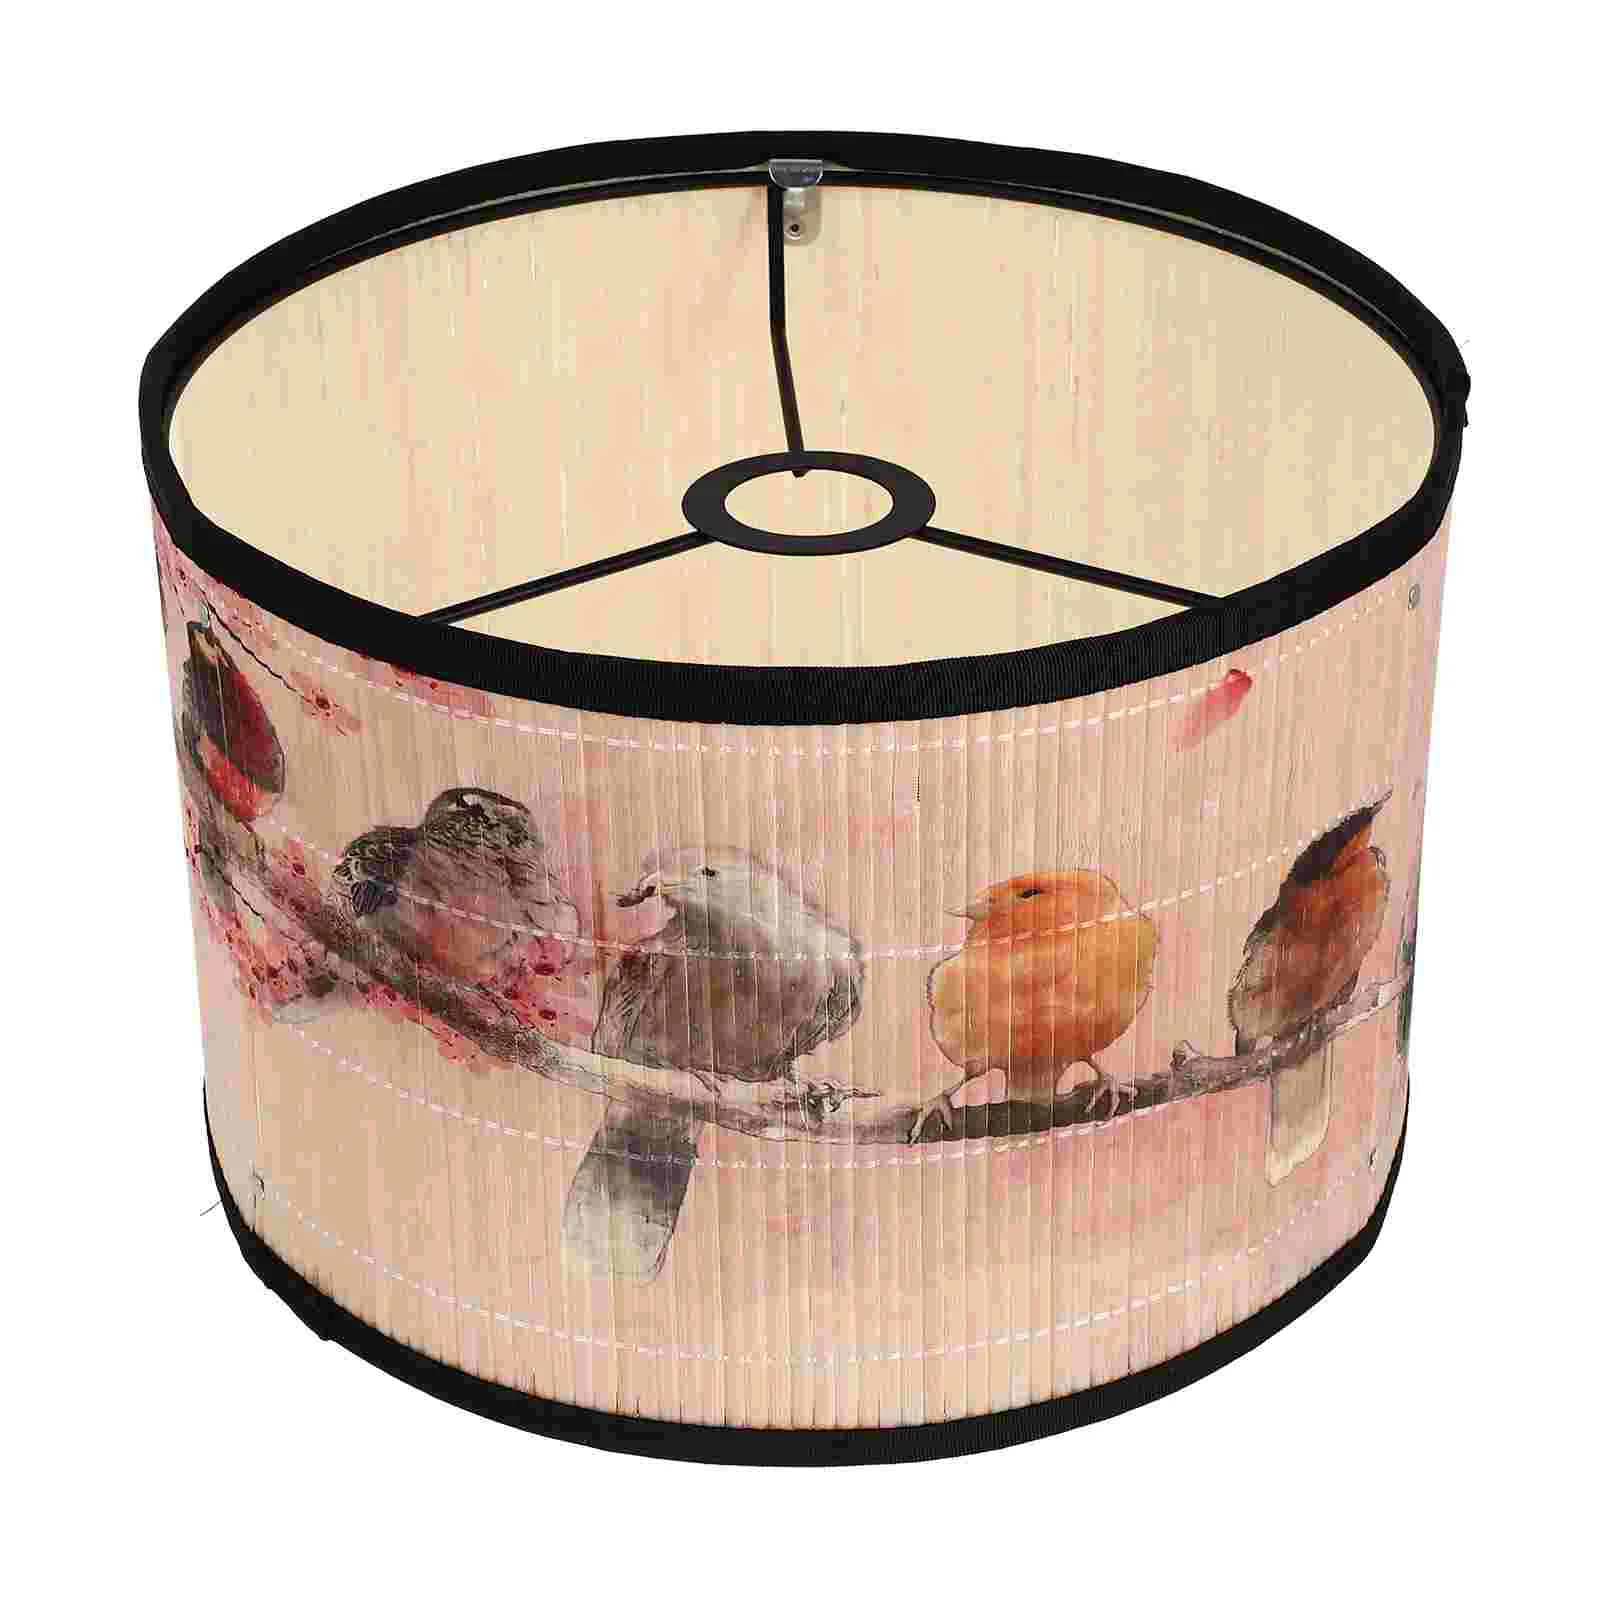 Bamboo Lampshade Home Retro Dining Room Decor Branches Hanging Decoration Ceiling chinese ancient style table lamp shade retro floral bird art lamp shade ceiling light dining chandelie homestay hotel lampshade